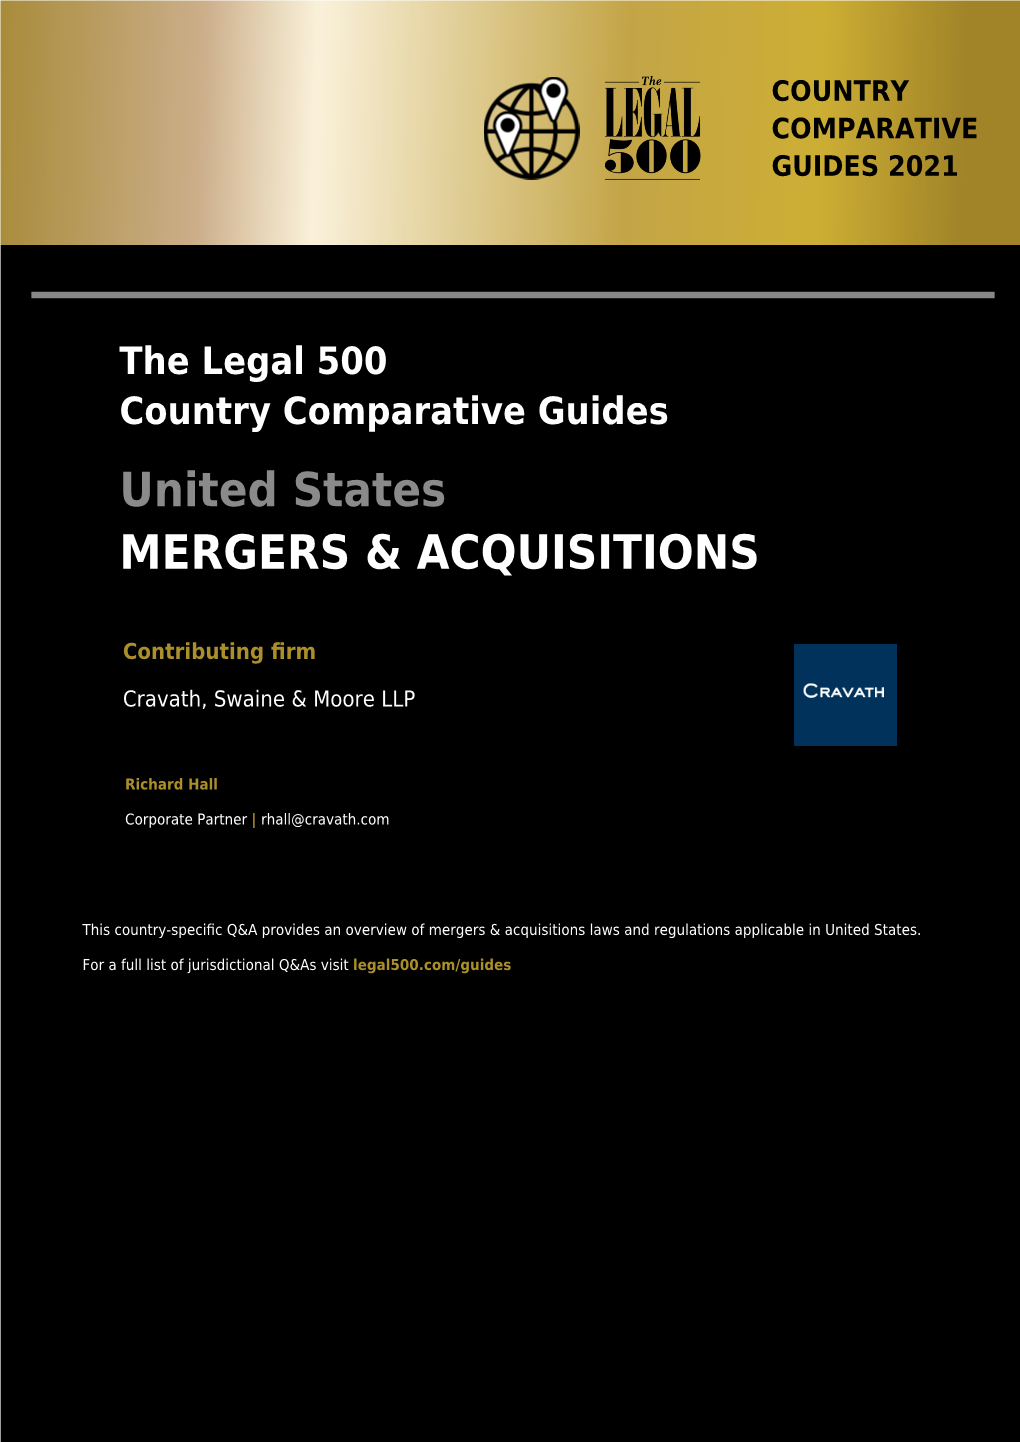 United States MERGERS & ACQUISITIONS